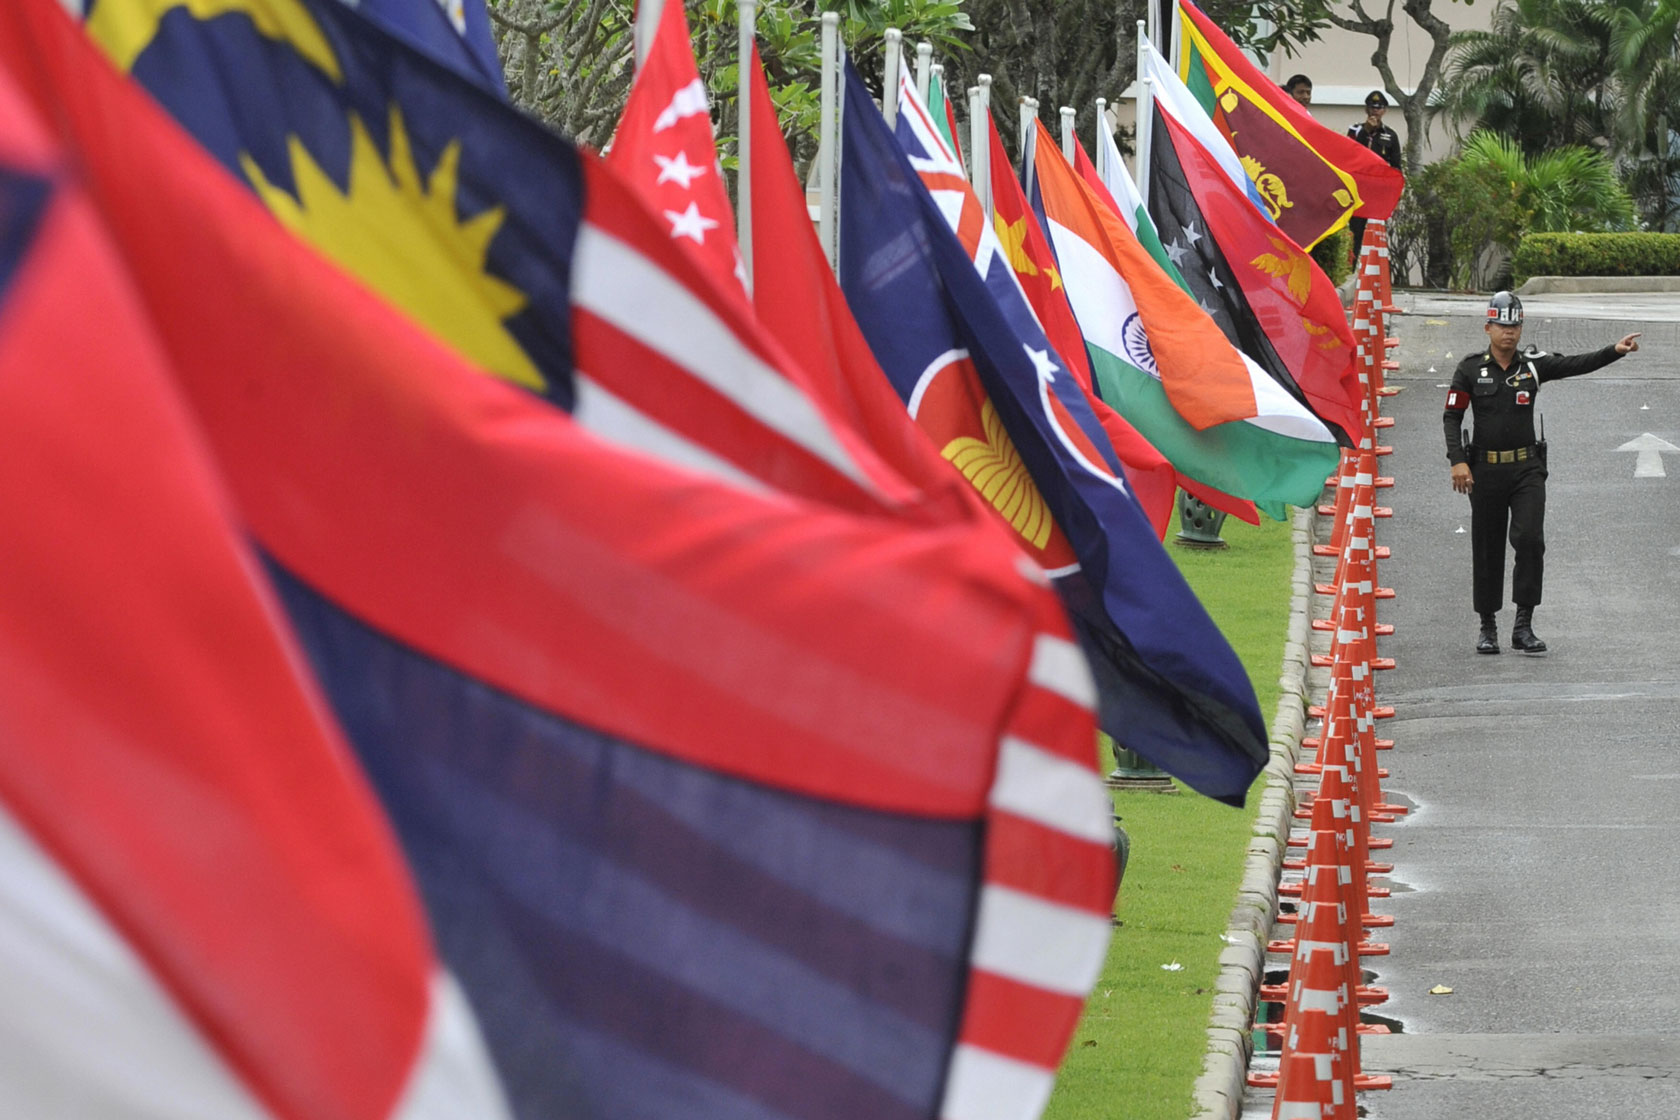 A soldier gestures from his position securing a road lined with the flags of member countries of the Association of Southeast Asian Nations (ASEAN), as well as regional dialogue partner countries.